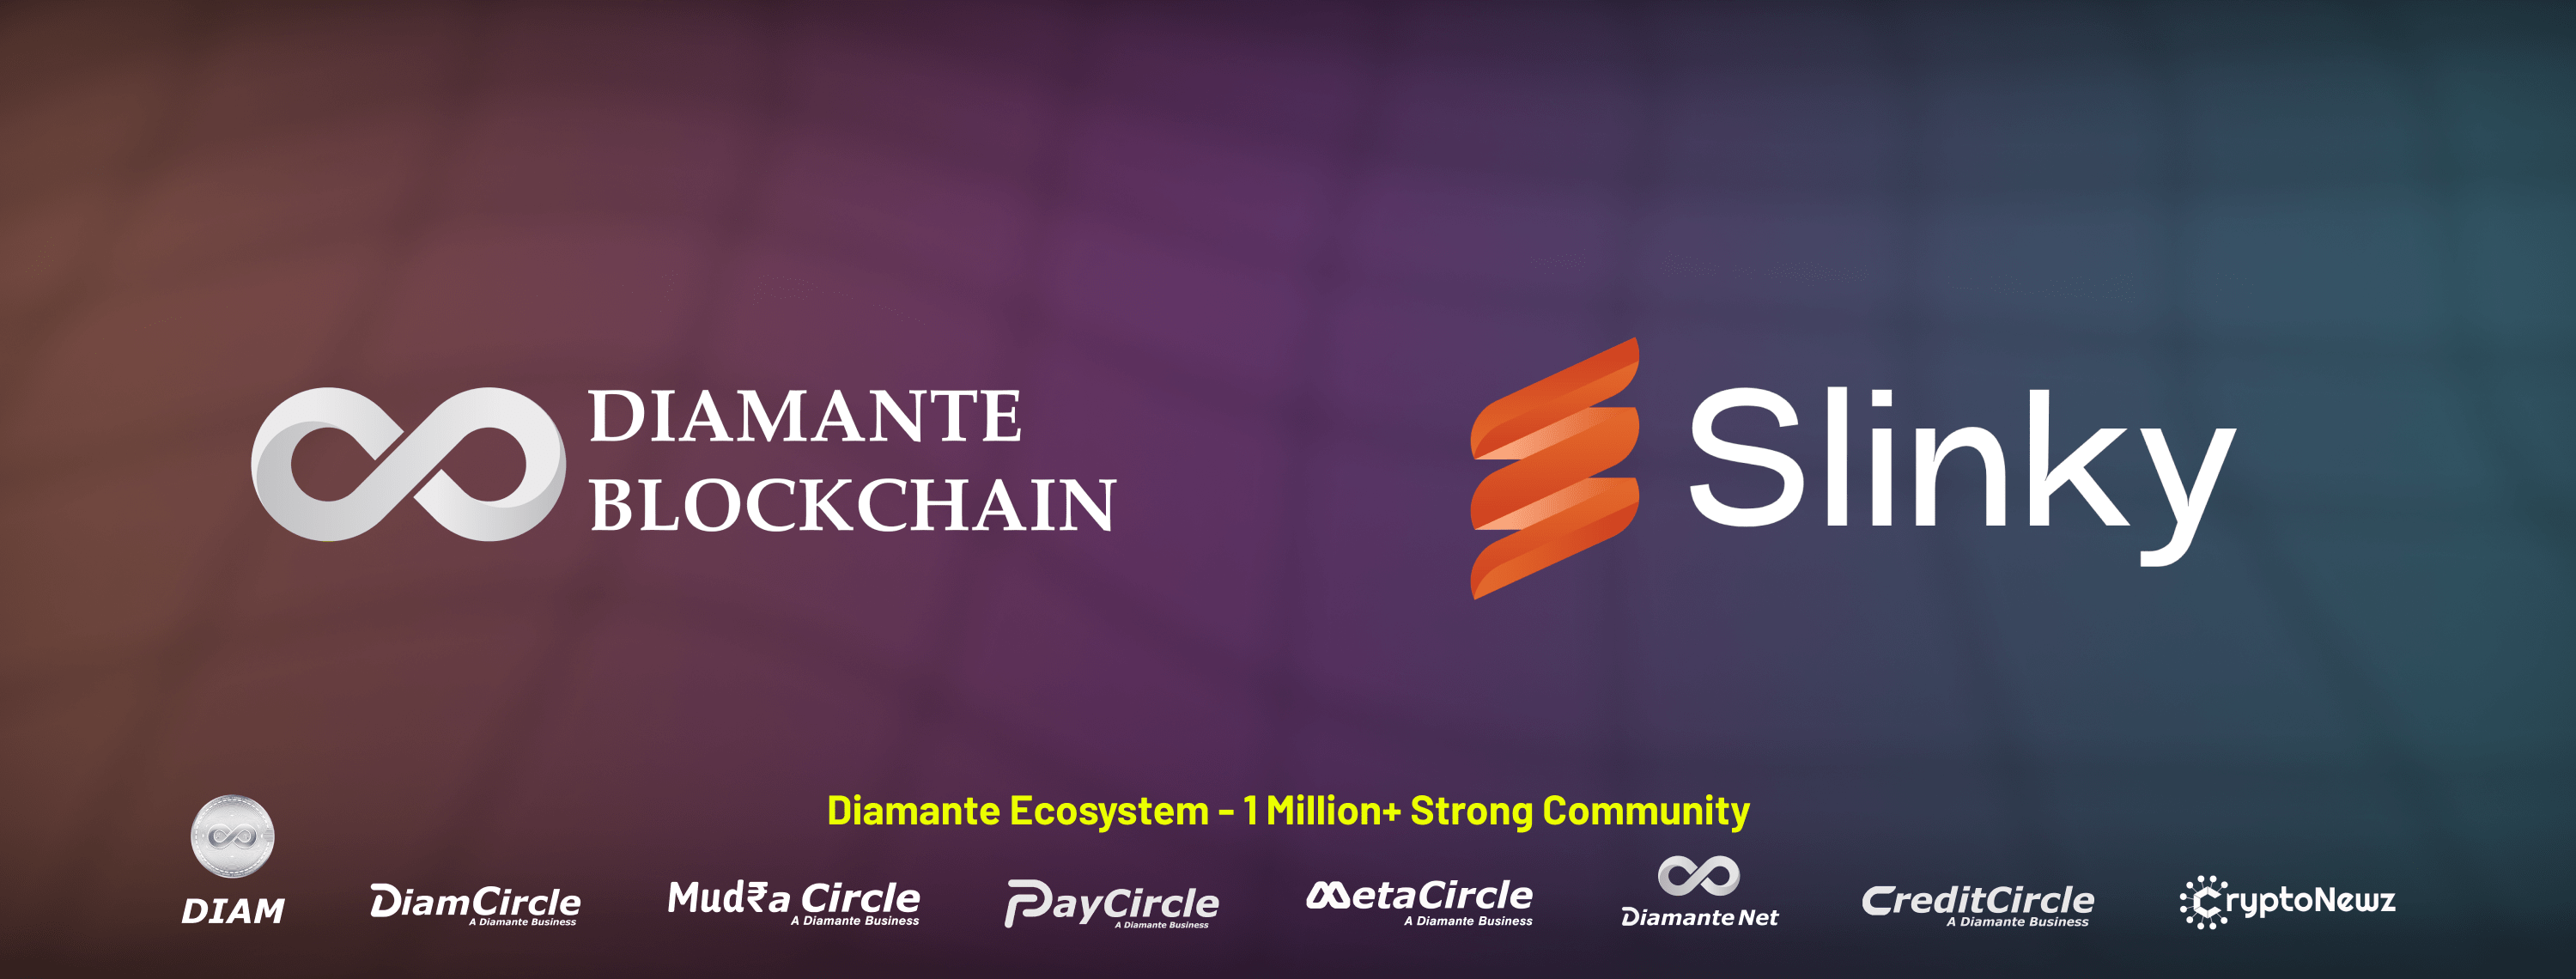 Promotional banner for Diamante Blockchain, showcasing its extensive ecosystem with logos of DiamCircle, Mudra Circle, PayCircle, MetaCircle, CreditCircle, and CryptoNewz. Central to the design is the Diamante Blockchain logo, flanked by the Slinky logo, emphasizing the vibrant, technology-driven community of over one million members.